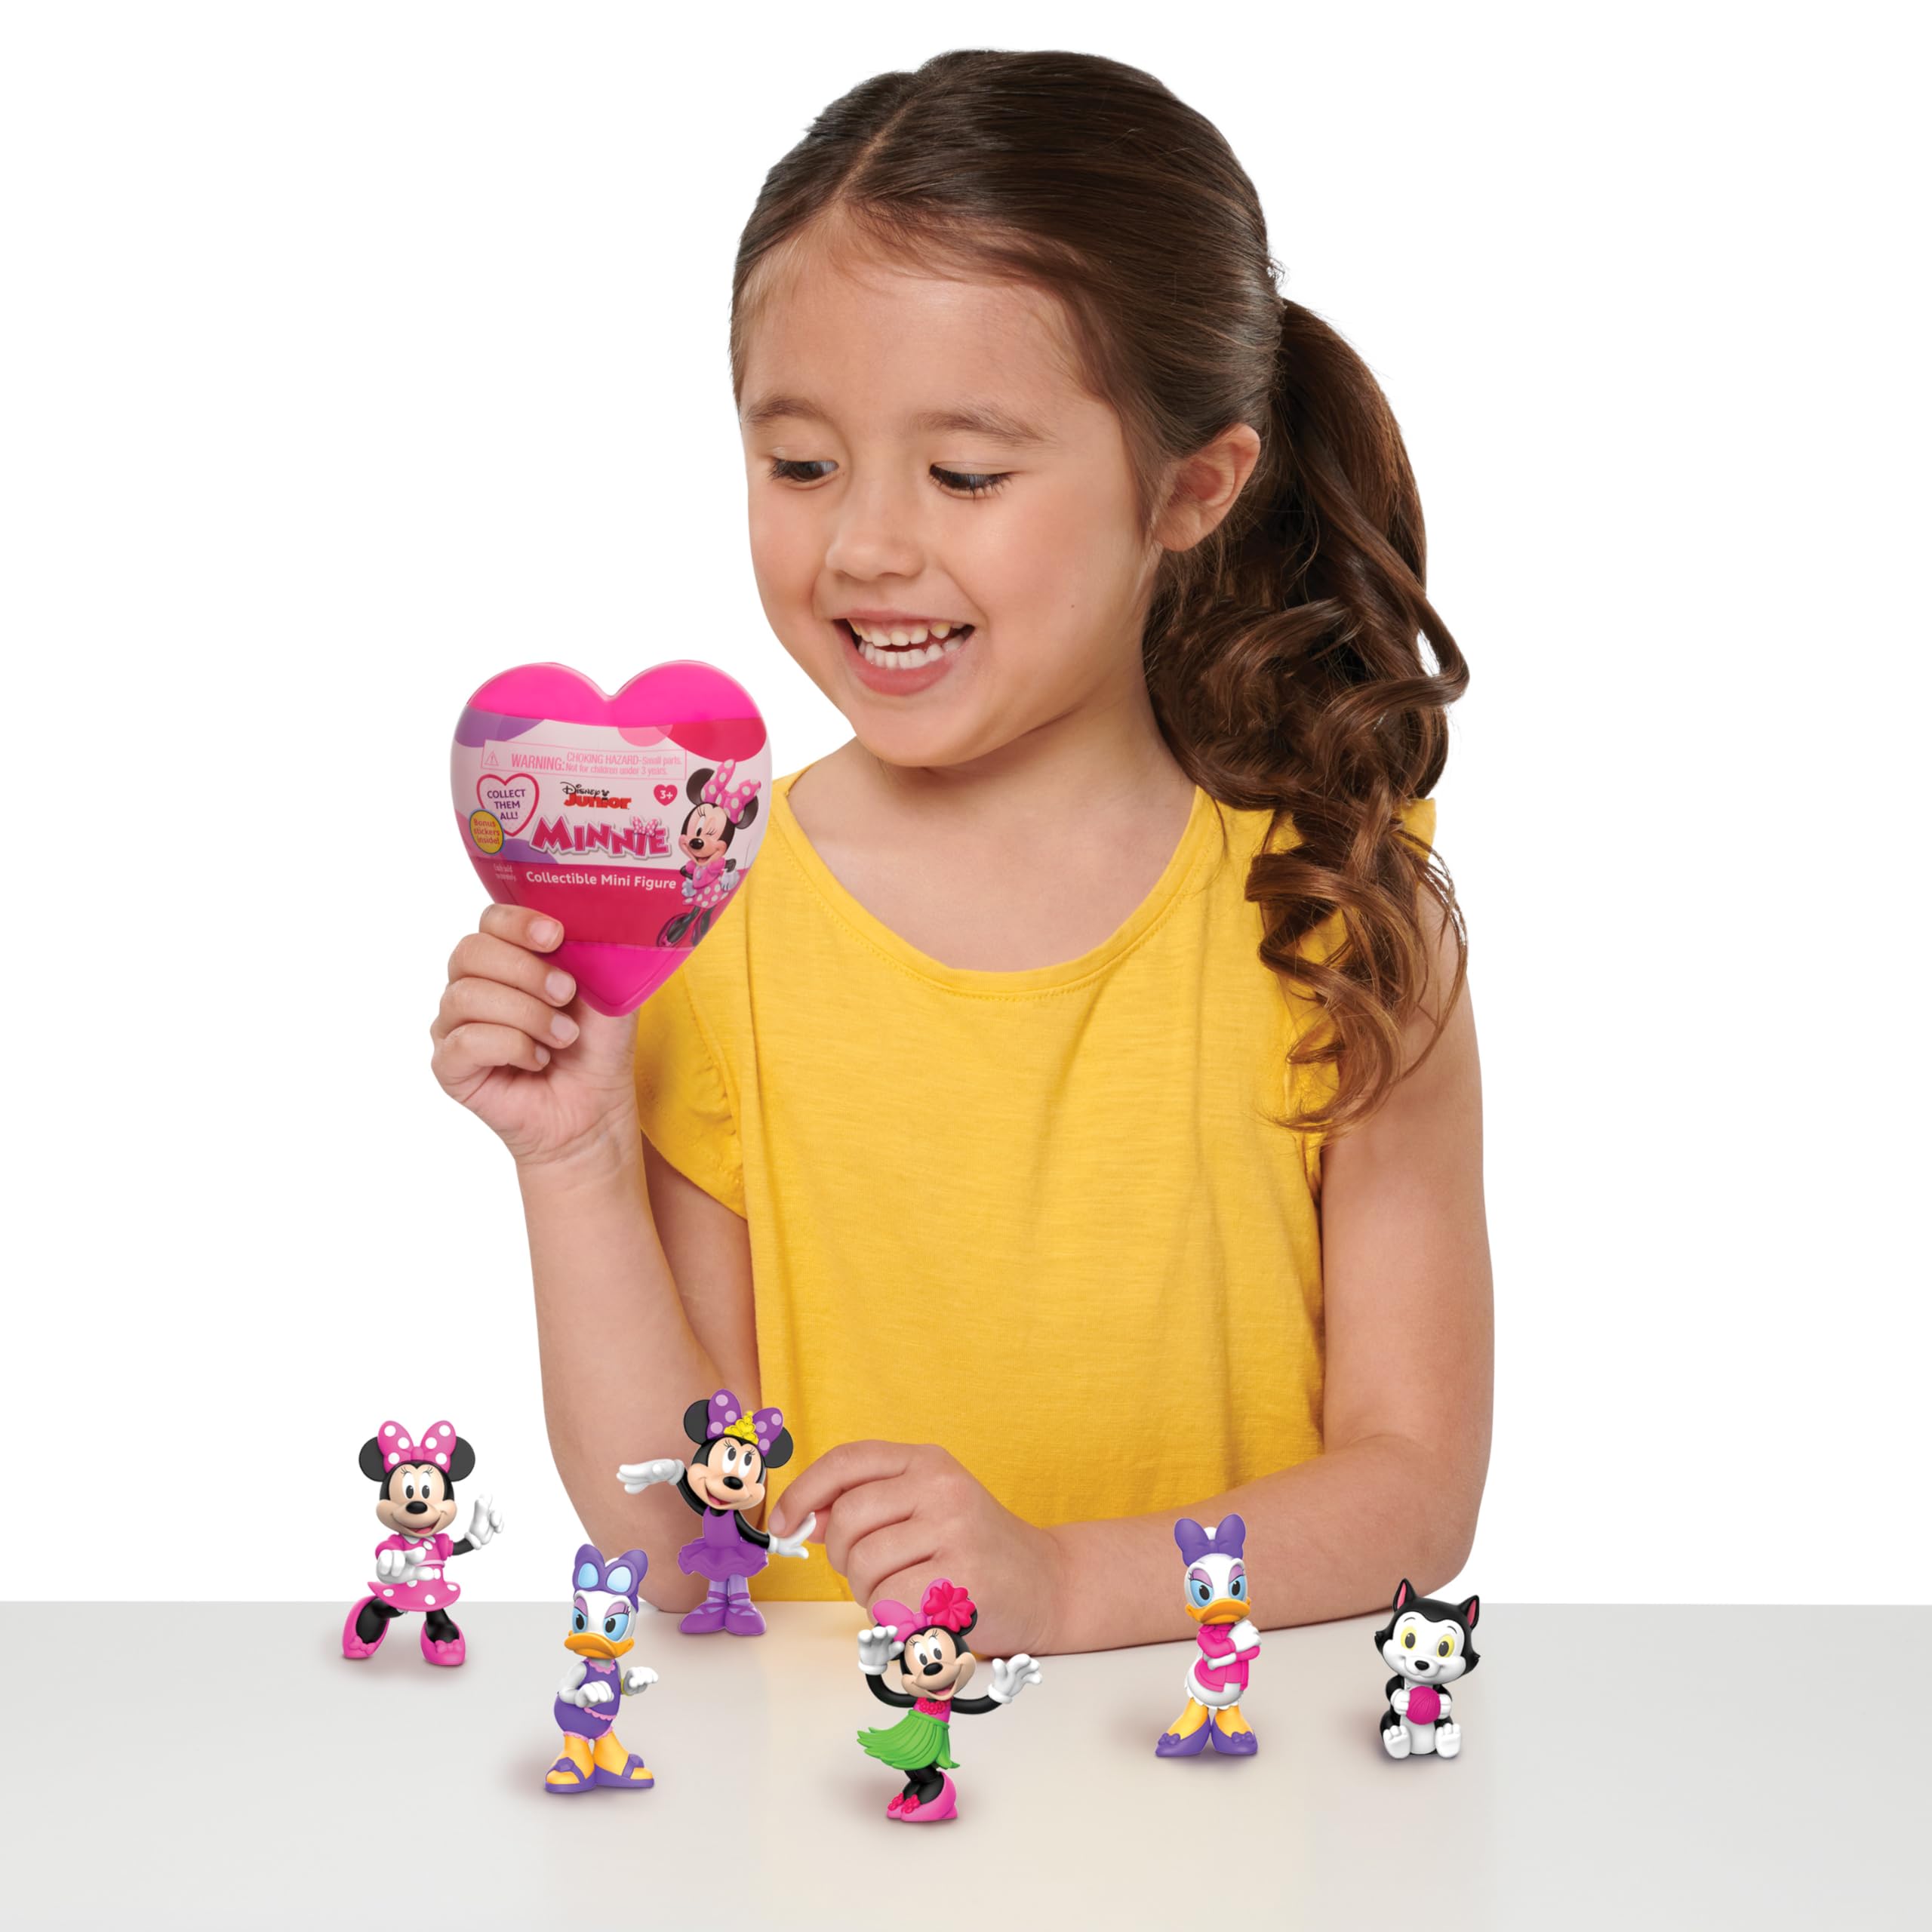 Just Play Disney Junior Minnie Mouse Valentine’s Mini Figure Capsules 2-Pack, 2.5-inch Figurines, Pink, Kids Toys for Ages 3 Up